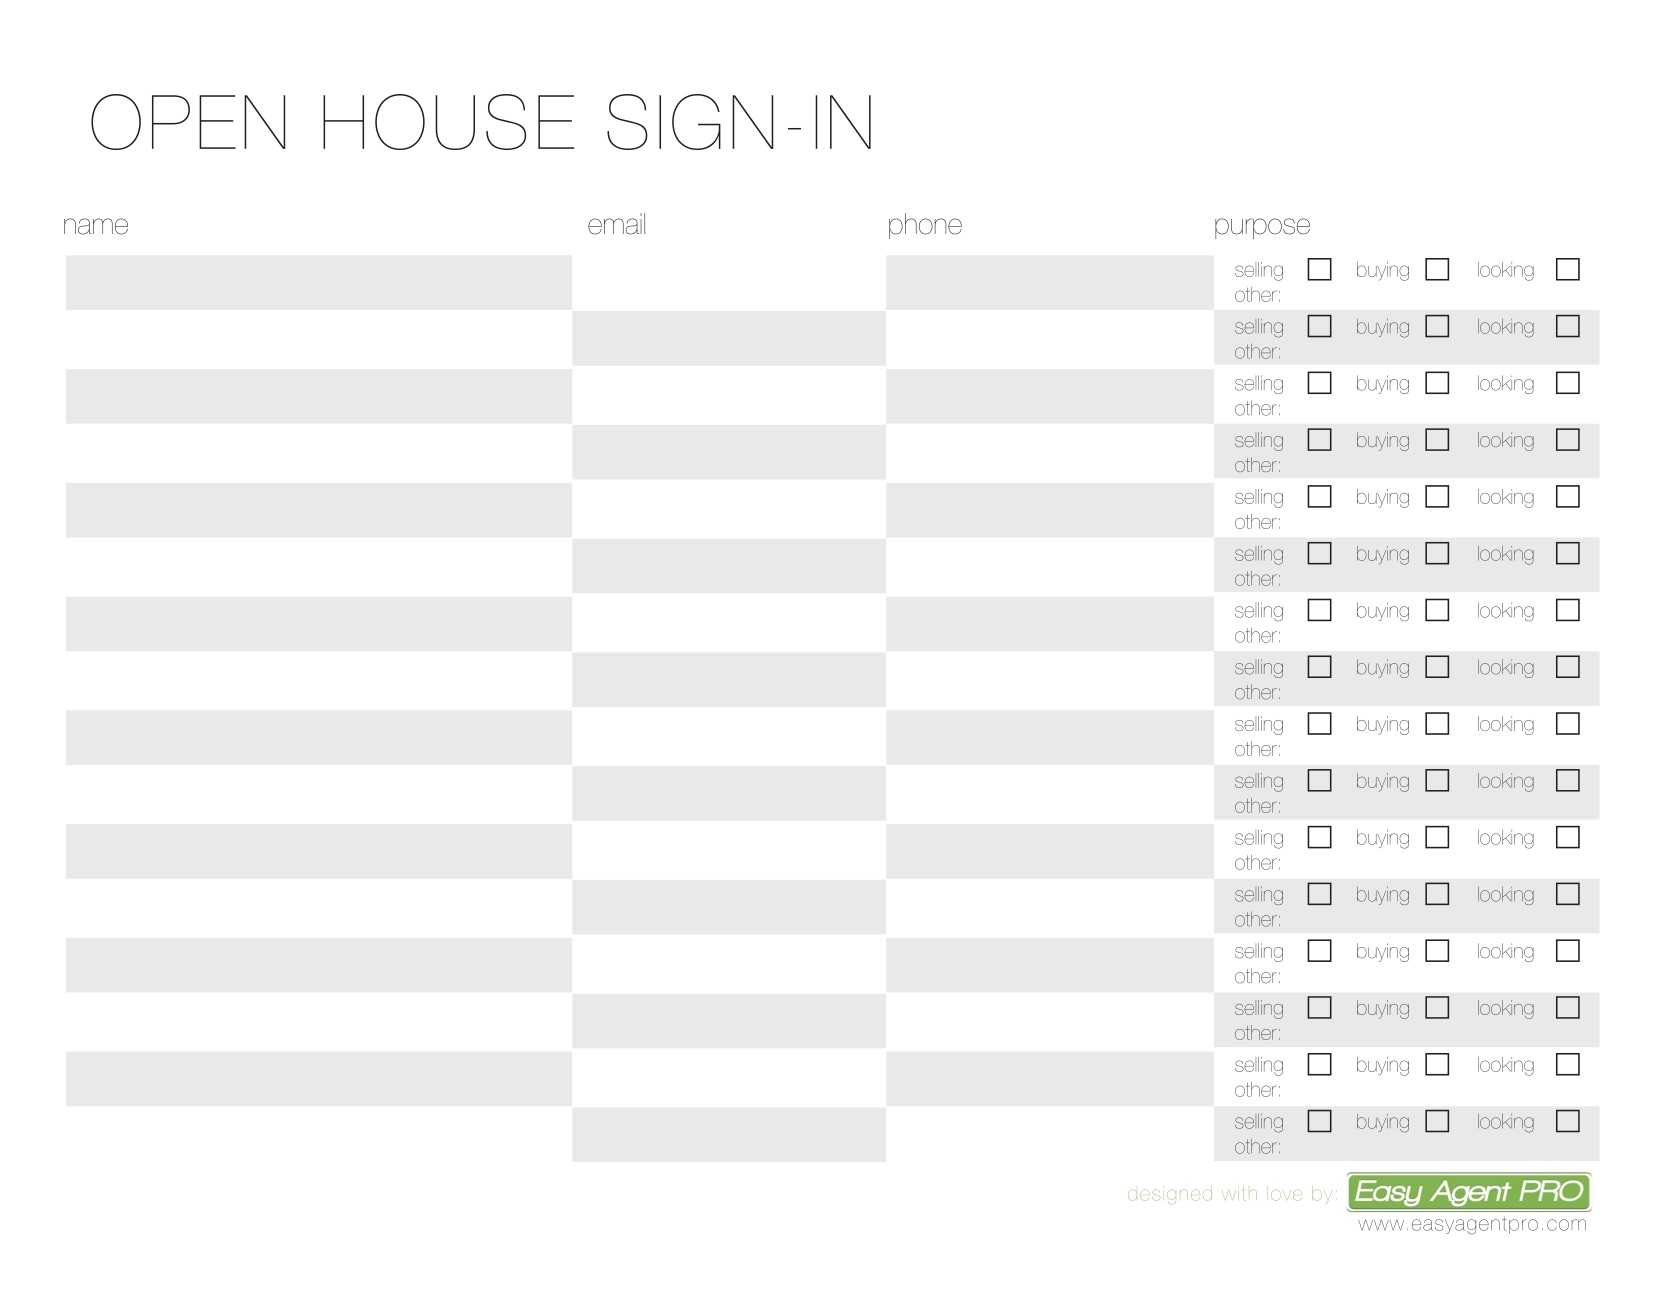 sign in sheet for open houses   Ibov.jonathandedecker.com